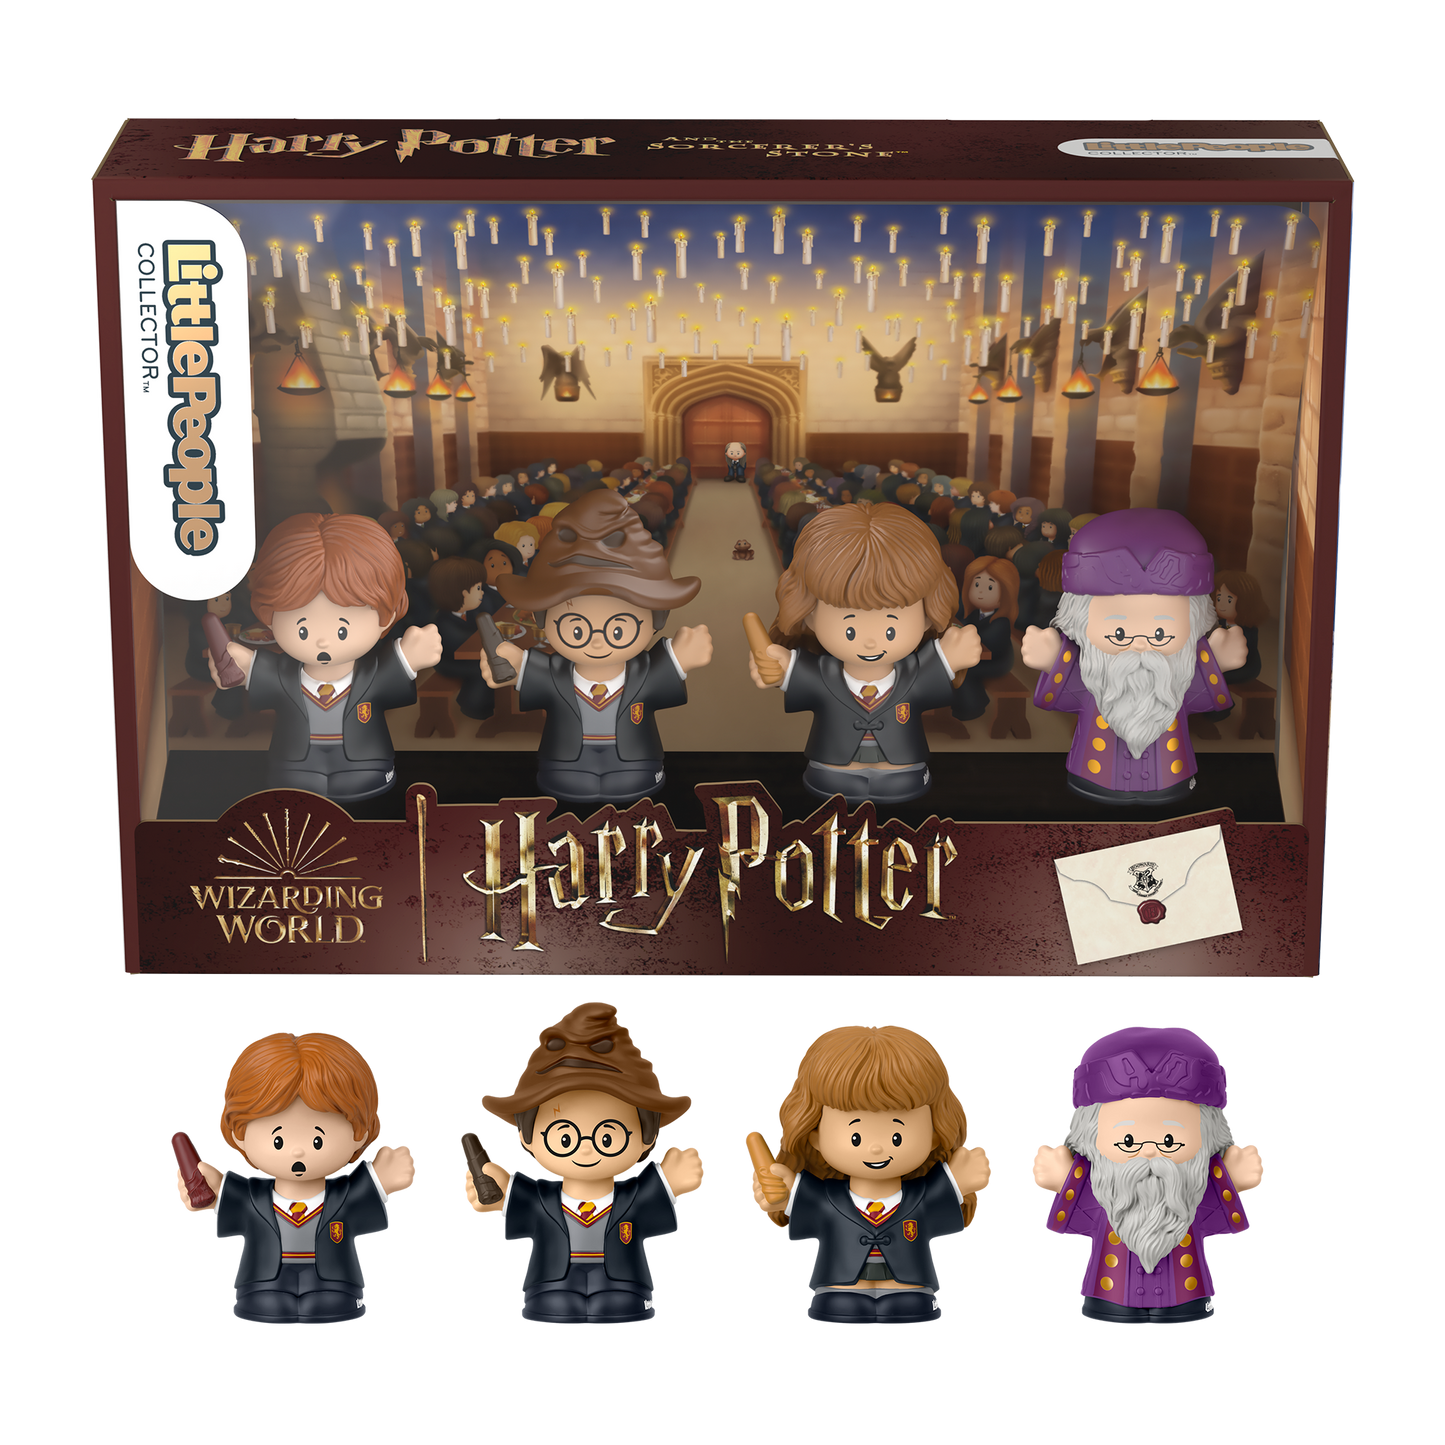 Fisher-Price Little People Collector Harry Potter And The Sorcerer's Stone